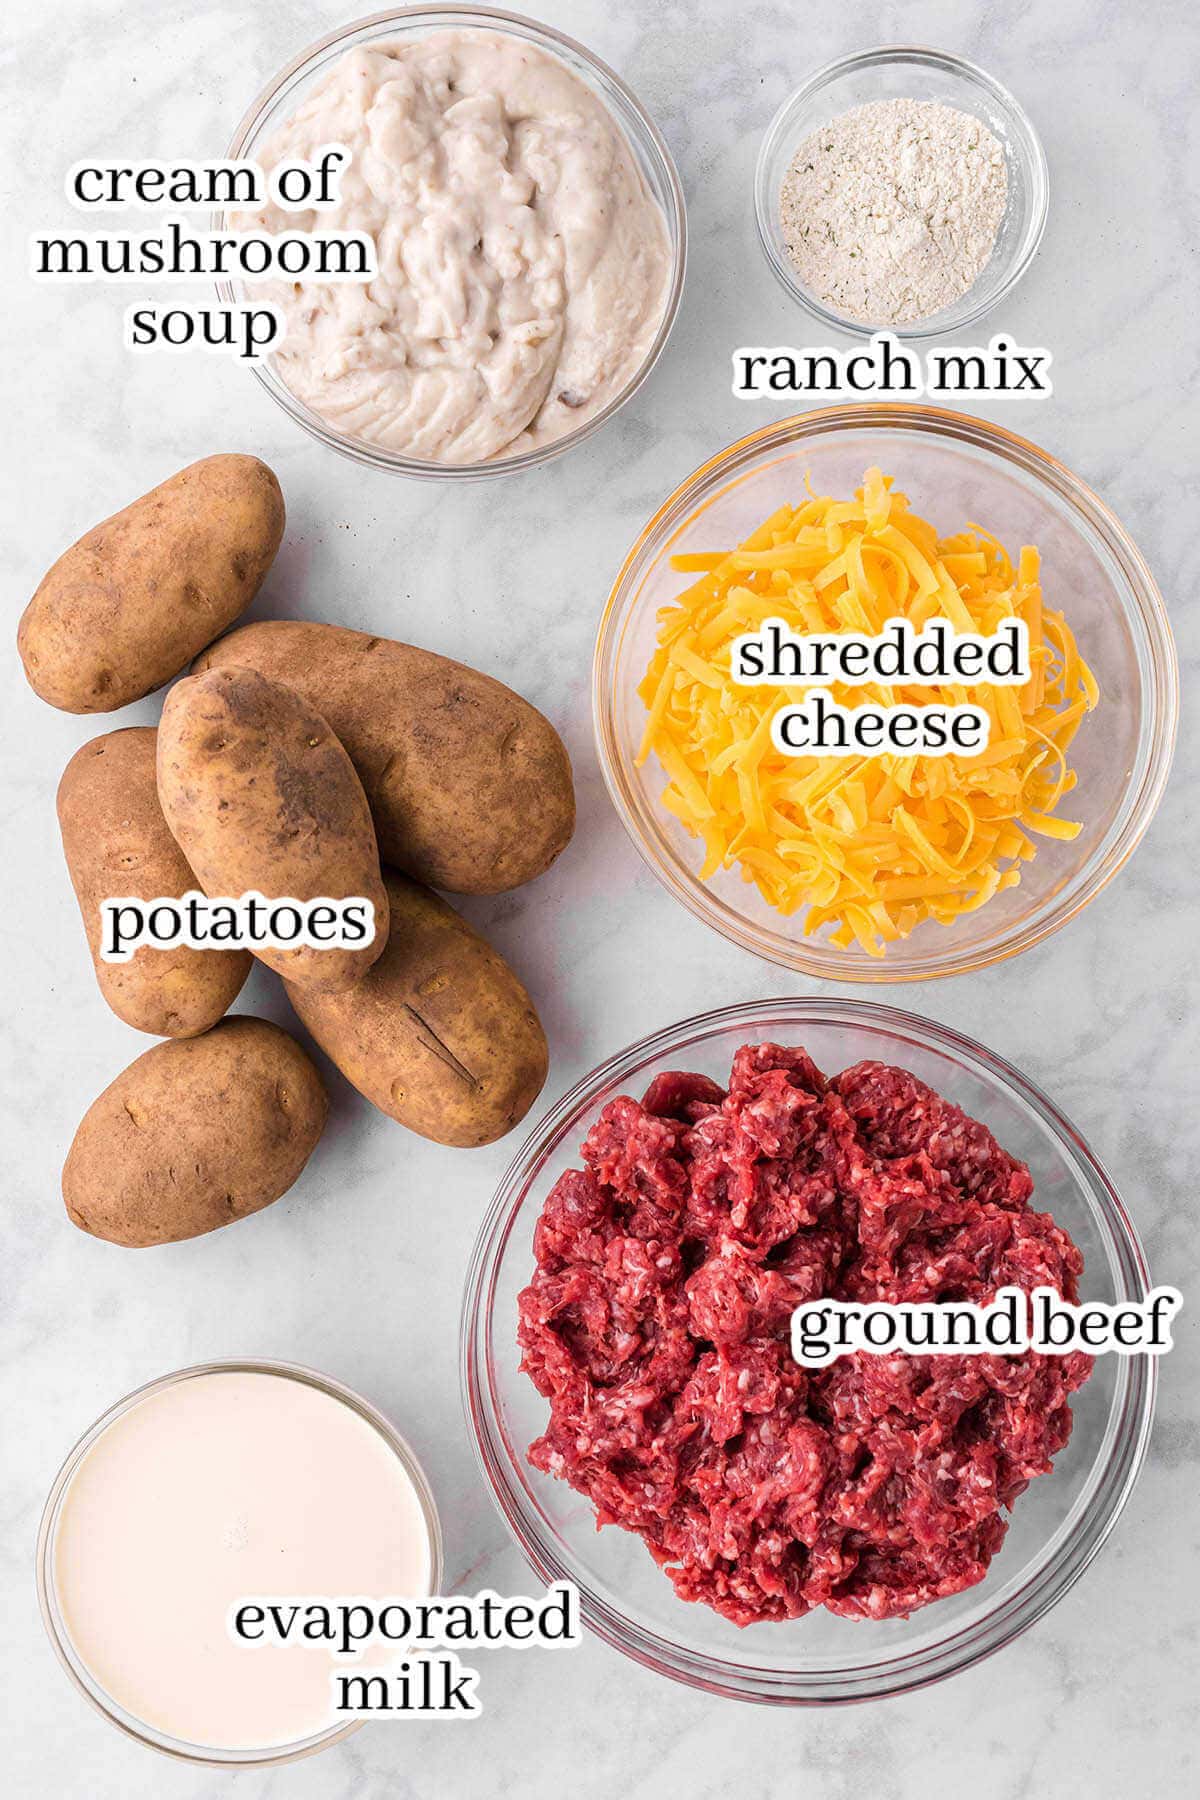 Ingredients to make the casserole dish, with print overlay.